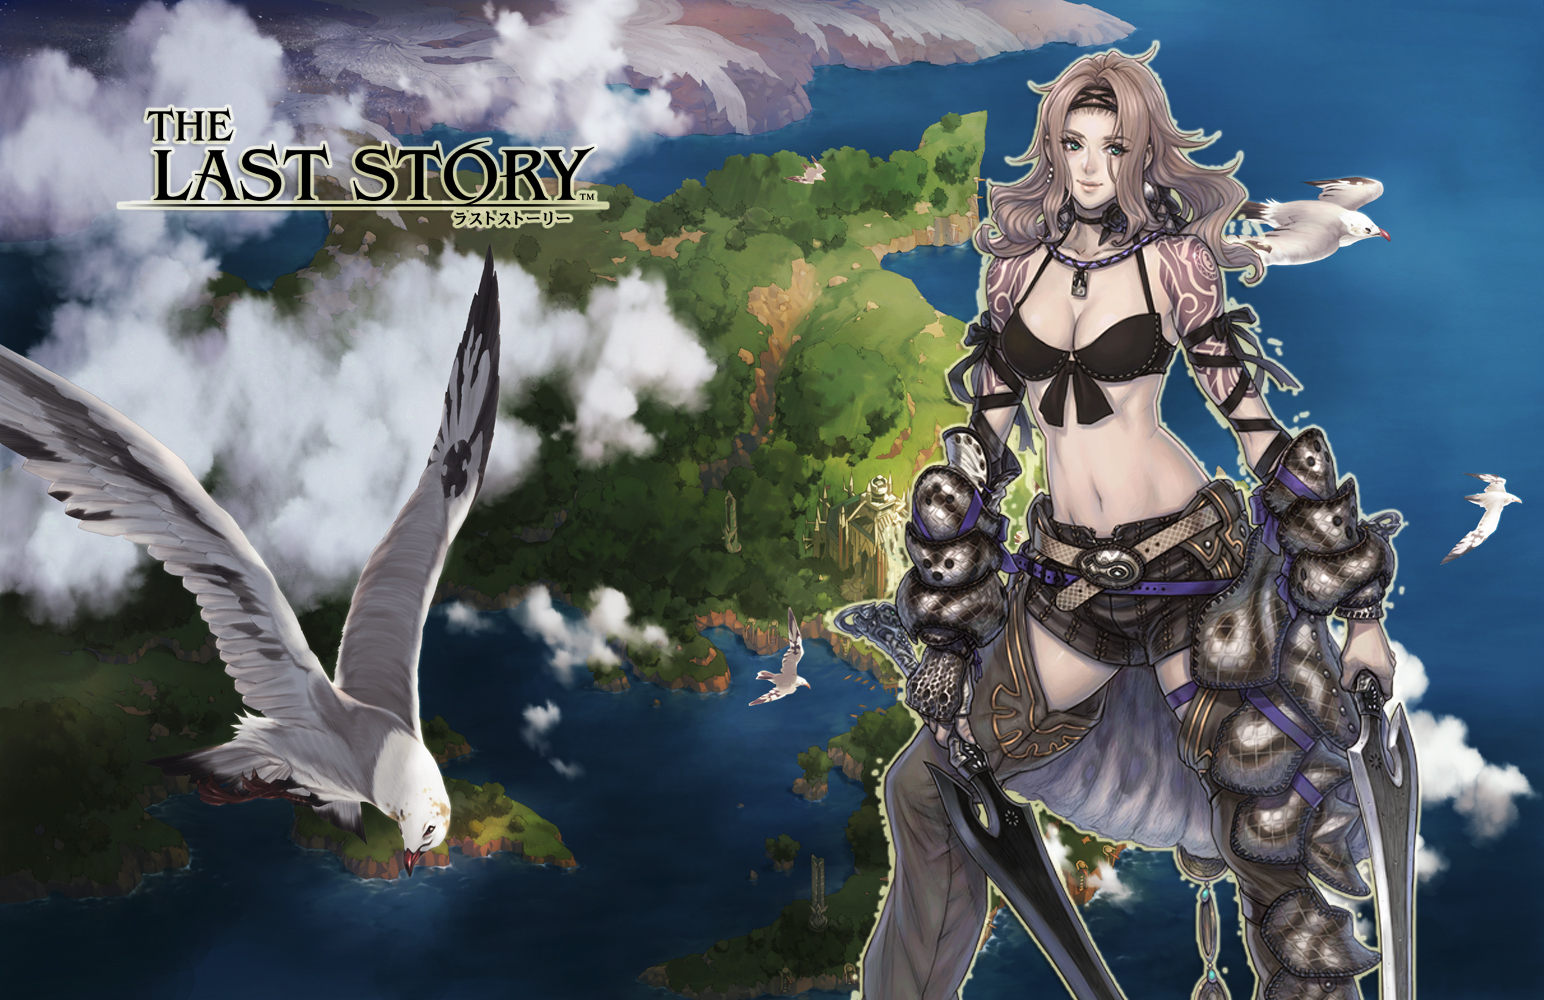 THE LAST STORY SEIREN PIC - IT'S A WONDERFUL WORLD